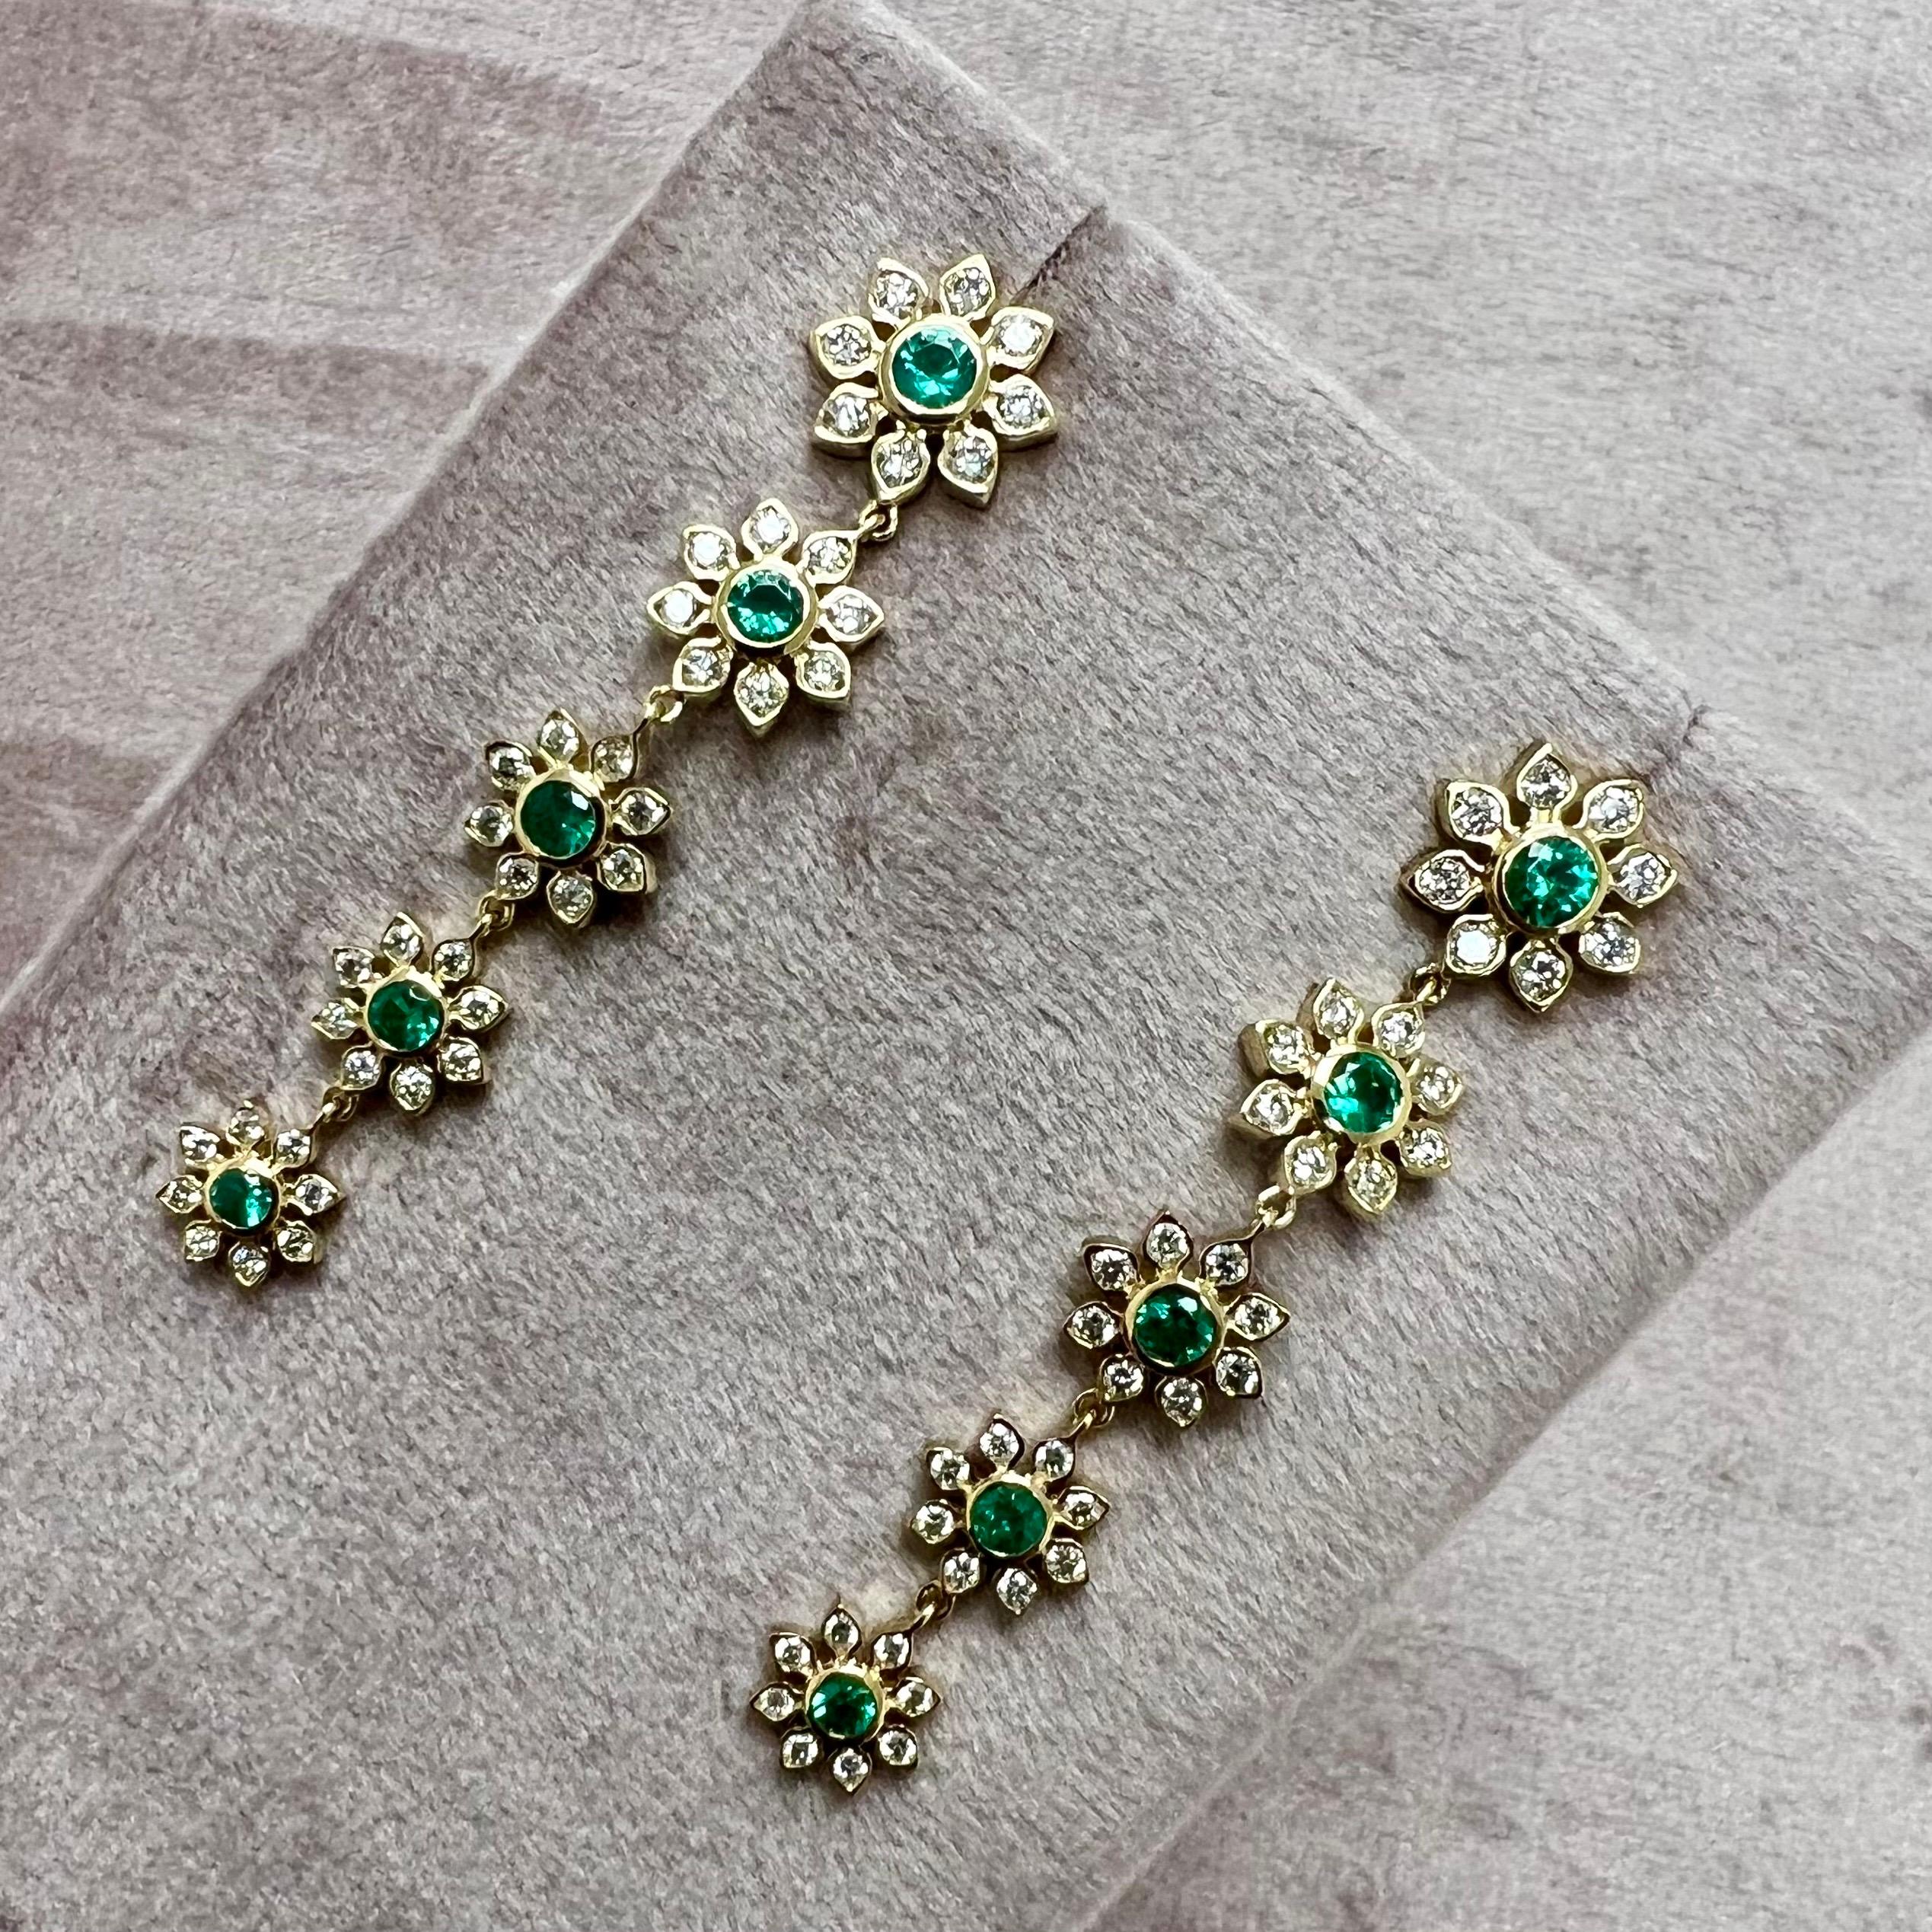 Created in 18 karat yellow gold
Emerald 1 carat approx.
Diamonds 1.30 carats approx.
Post backs for pierced ears
Limited Edition


About the Designers

Drawing inspiration from little things, Dharmesh & Namrata Kothari have created an extraordinary